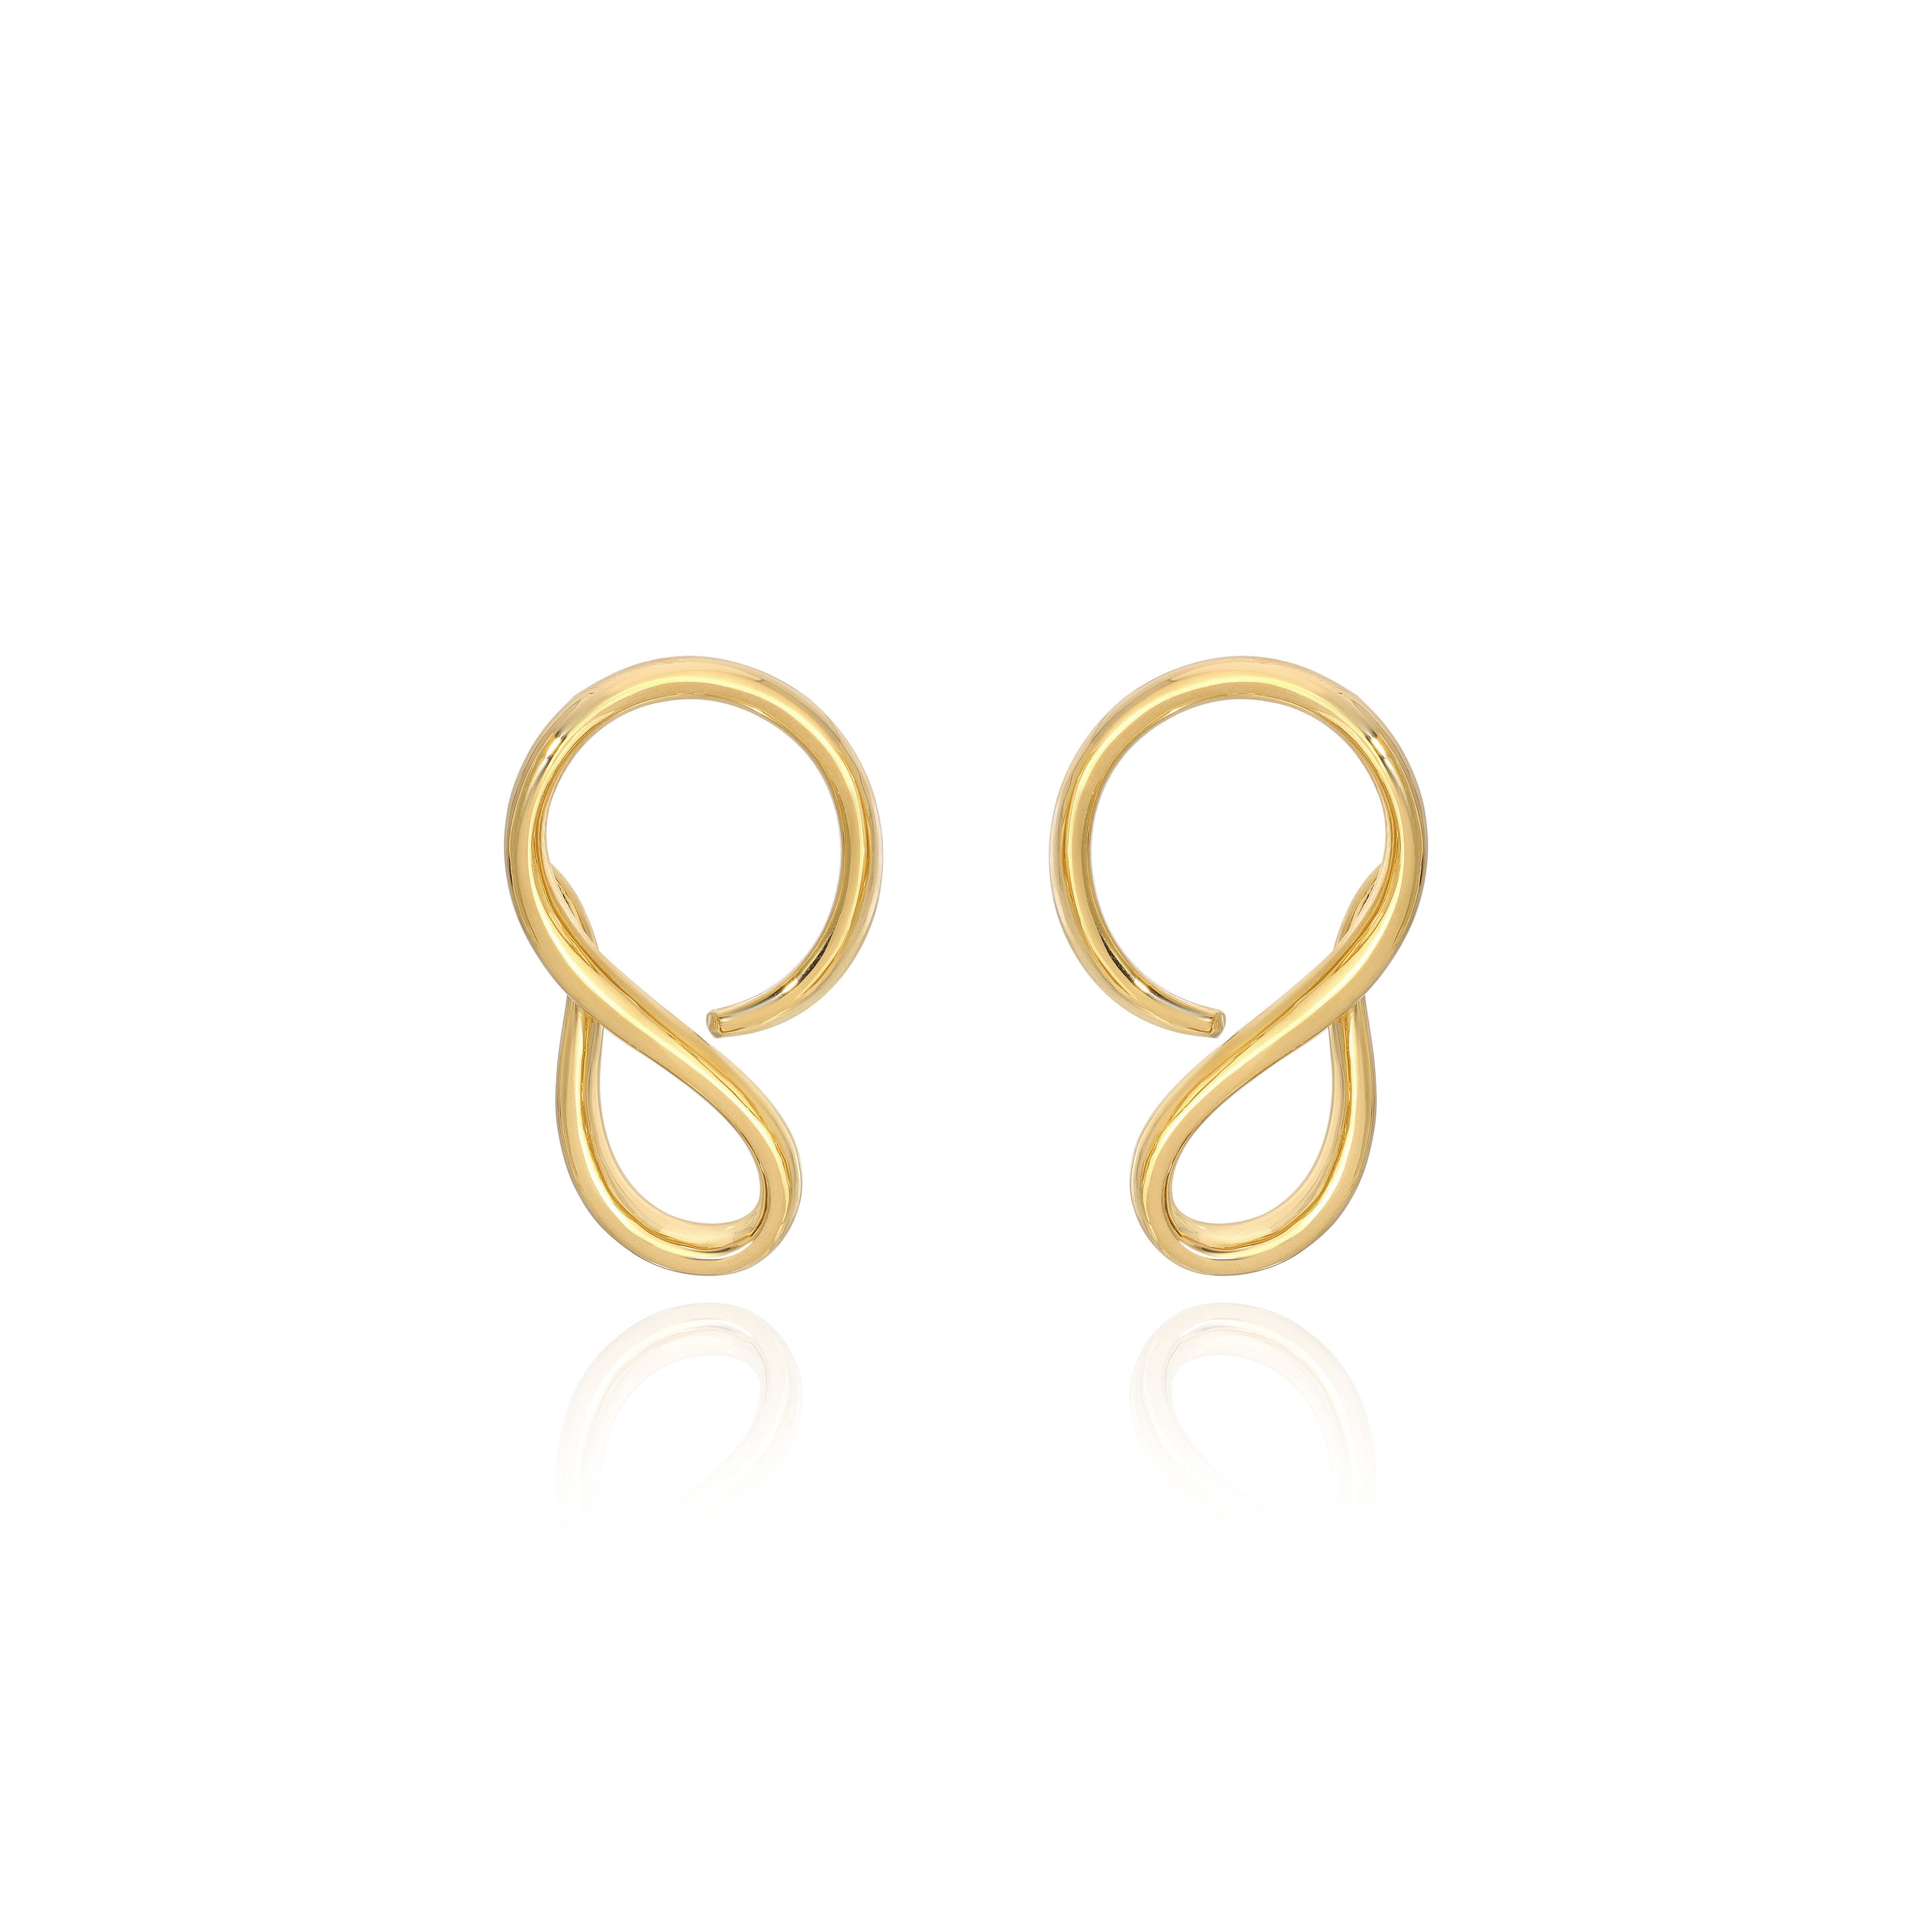 Yellow Gold Earrings in an extended S shape, Medium